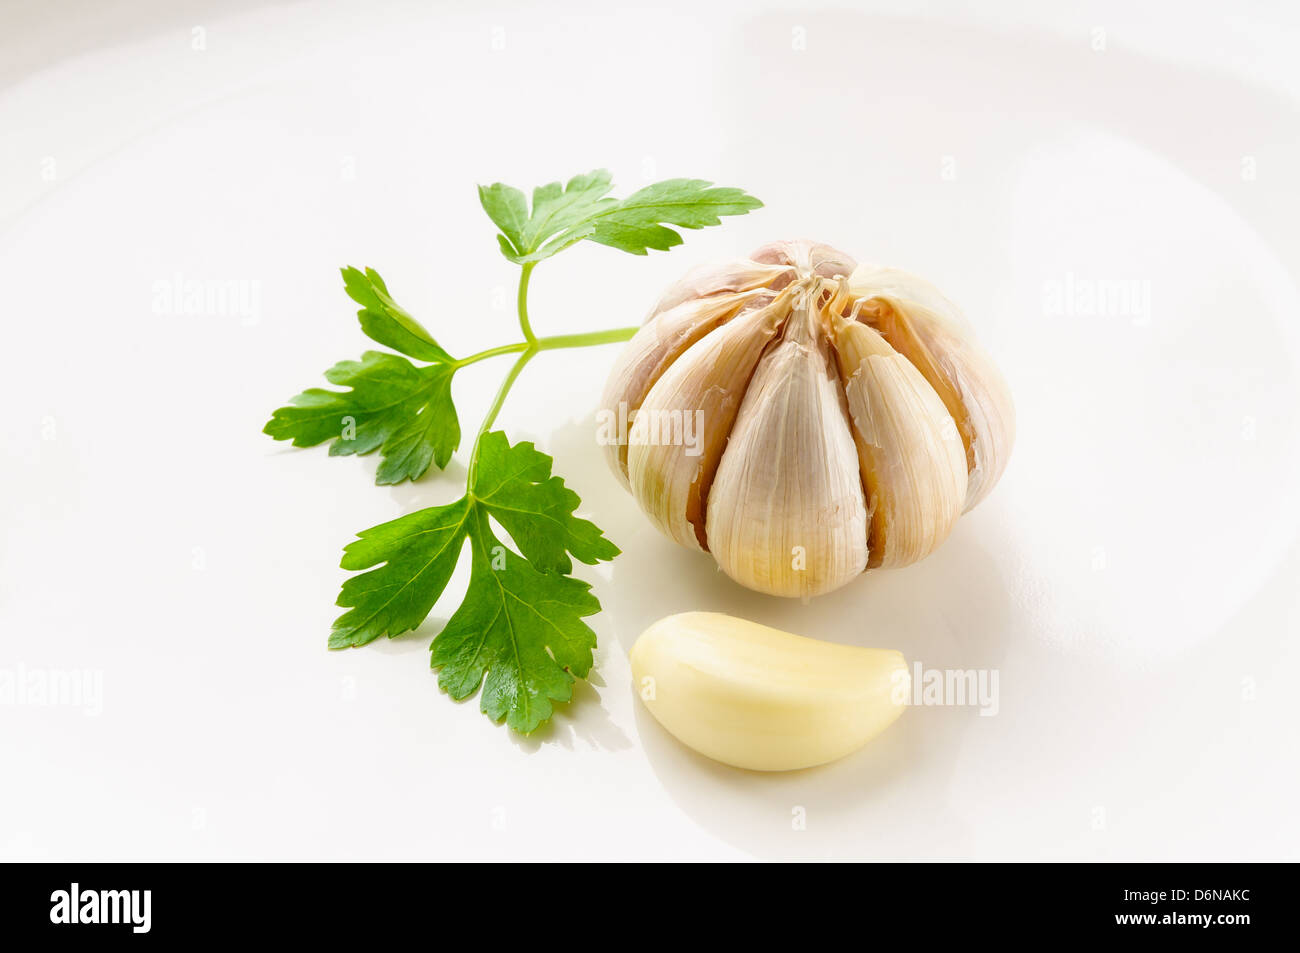 A clove of garlic and some leaves of parsley Stock Photo